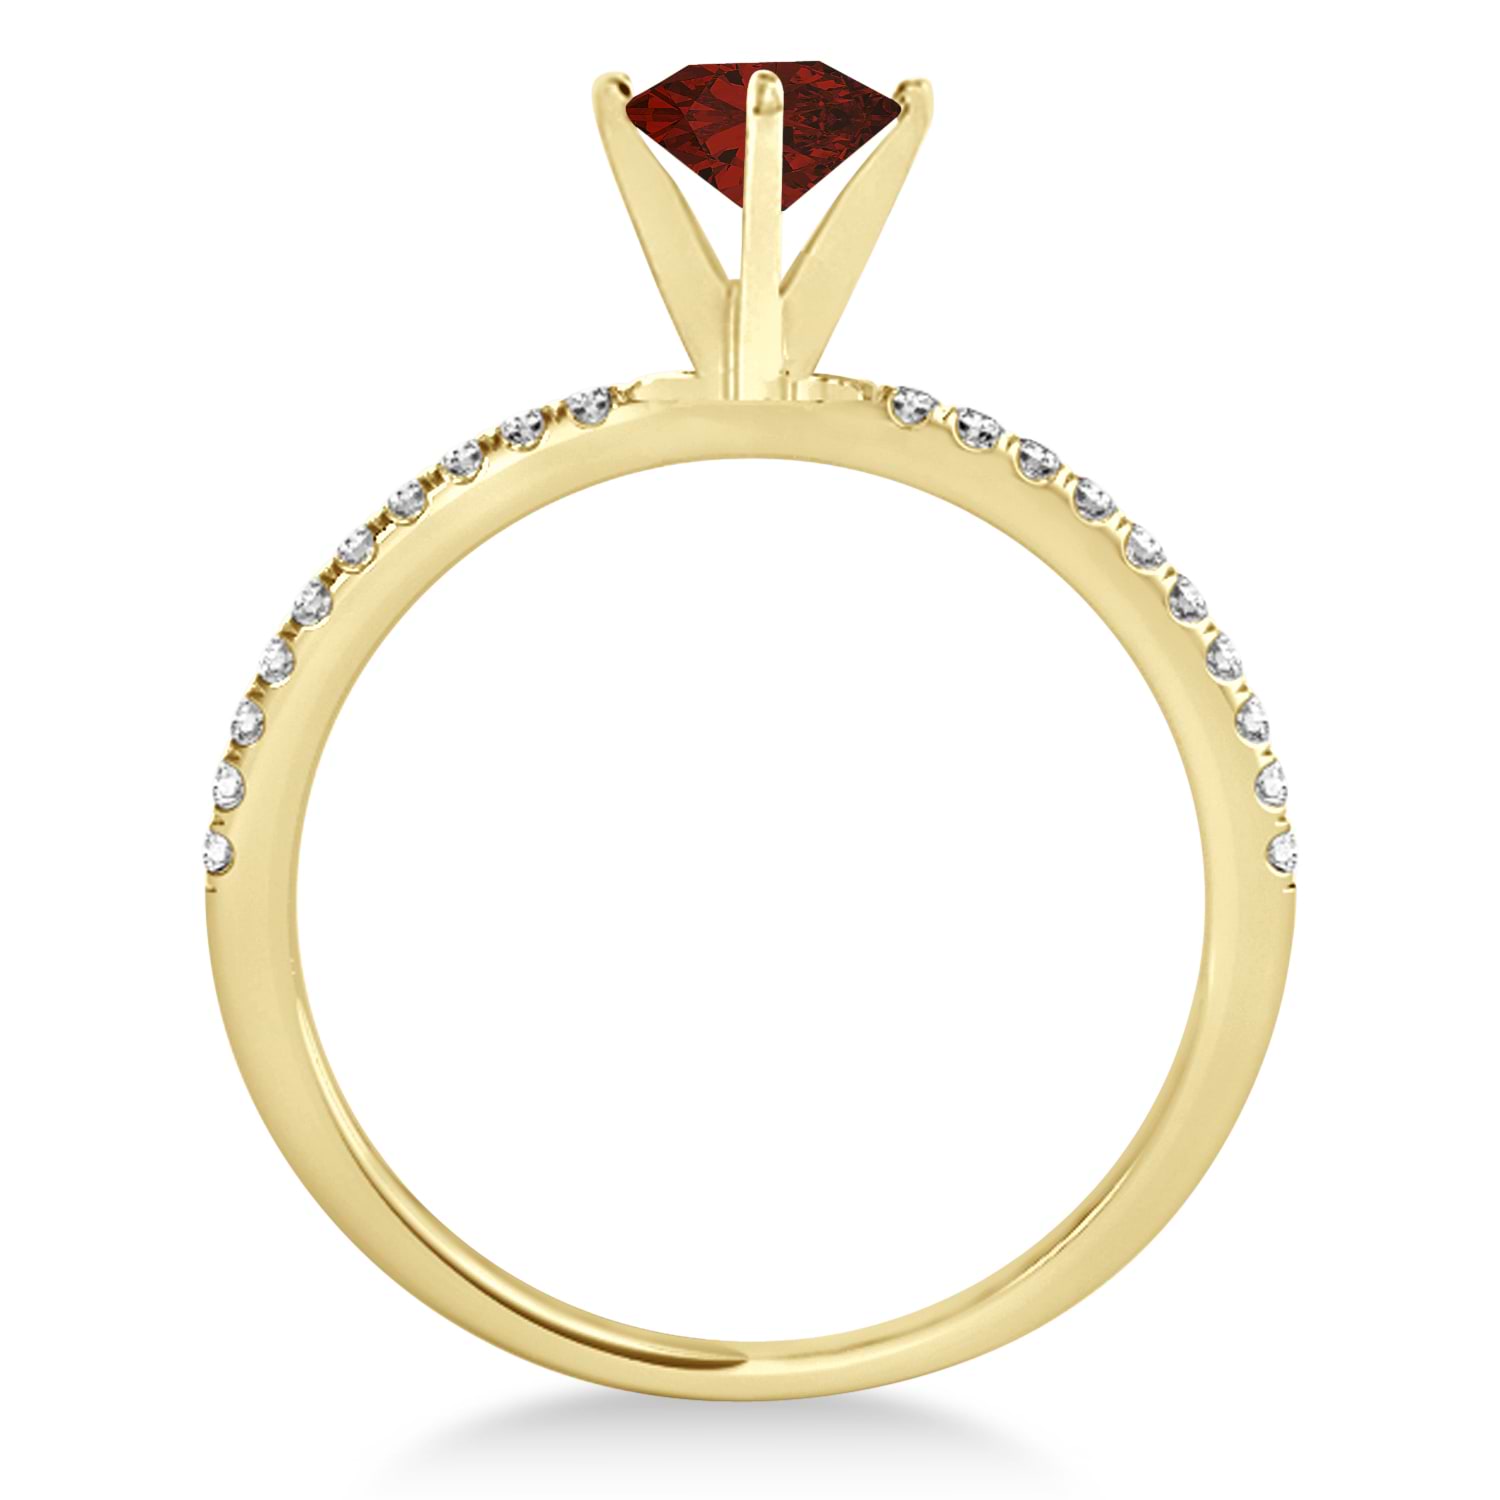 Garnet & Diamond Accented Oval Shape Engagement Ring 14k Yellow Gold (1.50ct)